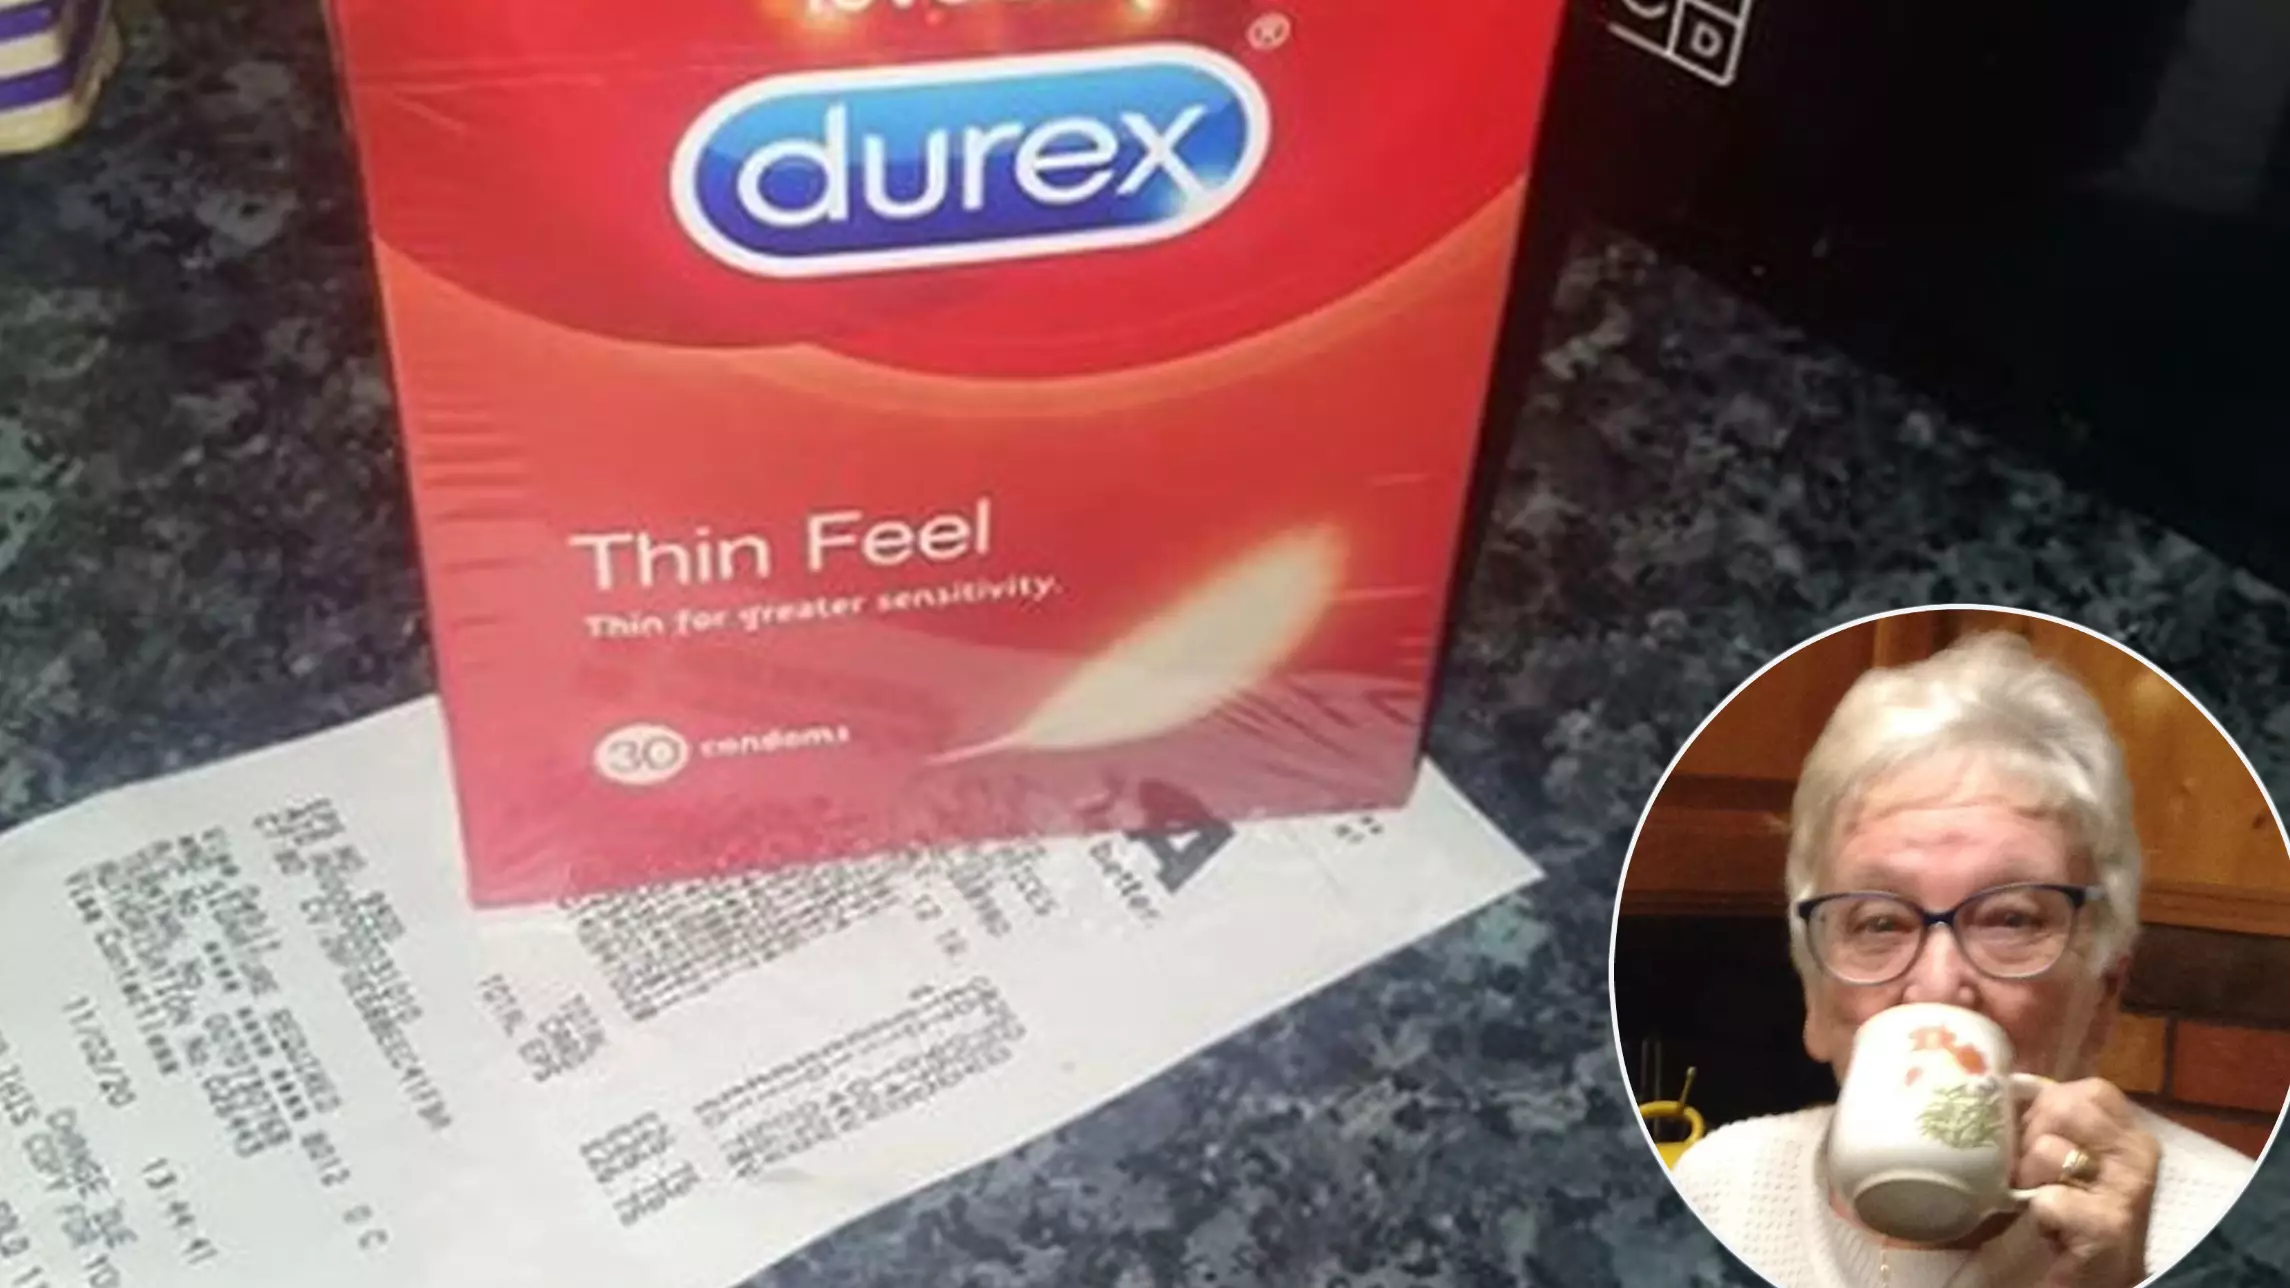 Gran Accidentally Buys 30-Pack Of Condoms Instead Of Teabags